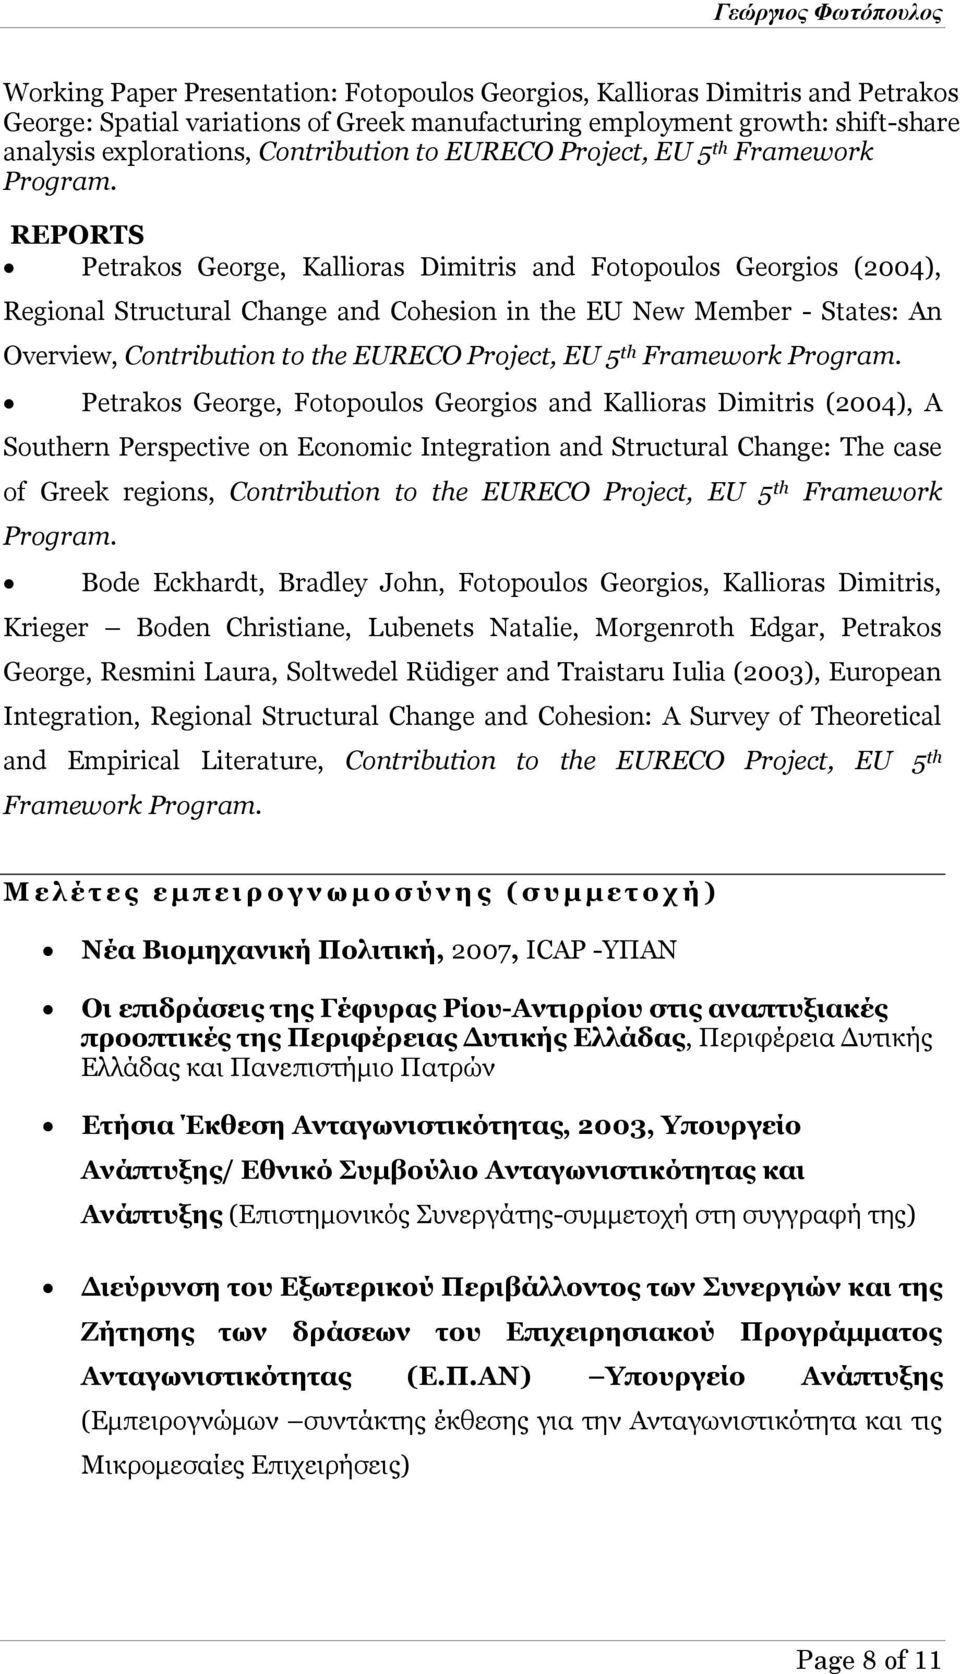 REPORTS Petrakos George, Kallioras Dimitris and Fotopoulos Georgios (2004), Regional Structural Change and Cohesion in the EU New Member - States: An Overview, Contribution to the EURECO Project, EU